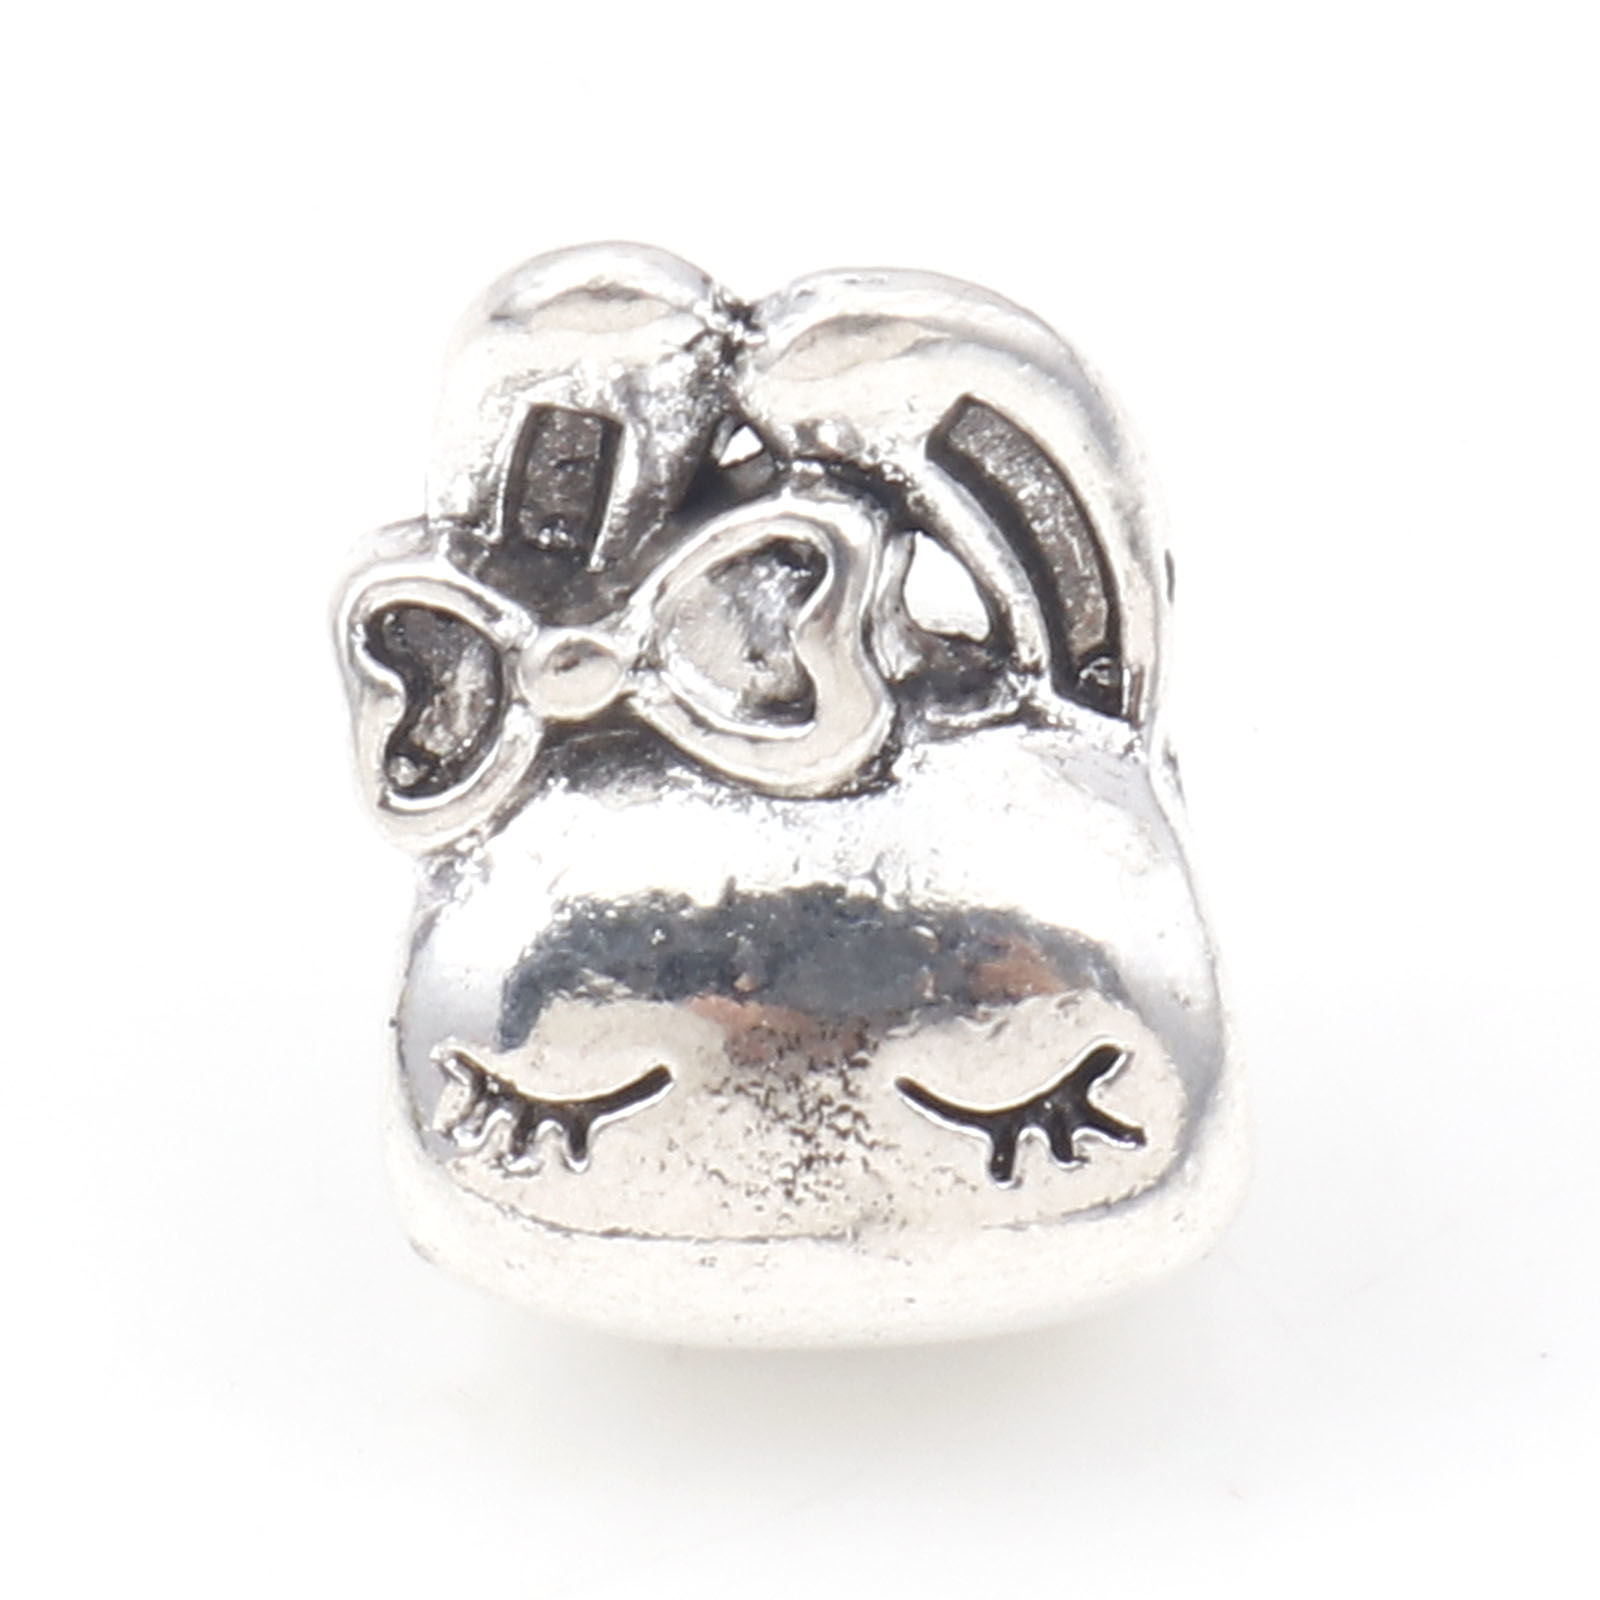 Picture of Zinc Based Alloy European Style Large Hole Charm Beads Antique Silver Color Rabbit Animal 13mm x 10mm, Hole: Approx 4.5mm, 30 PCs